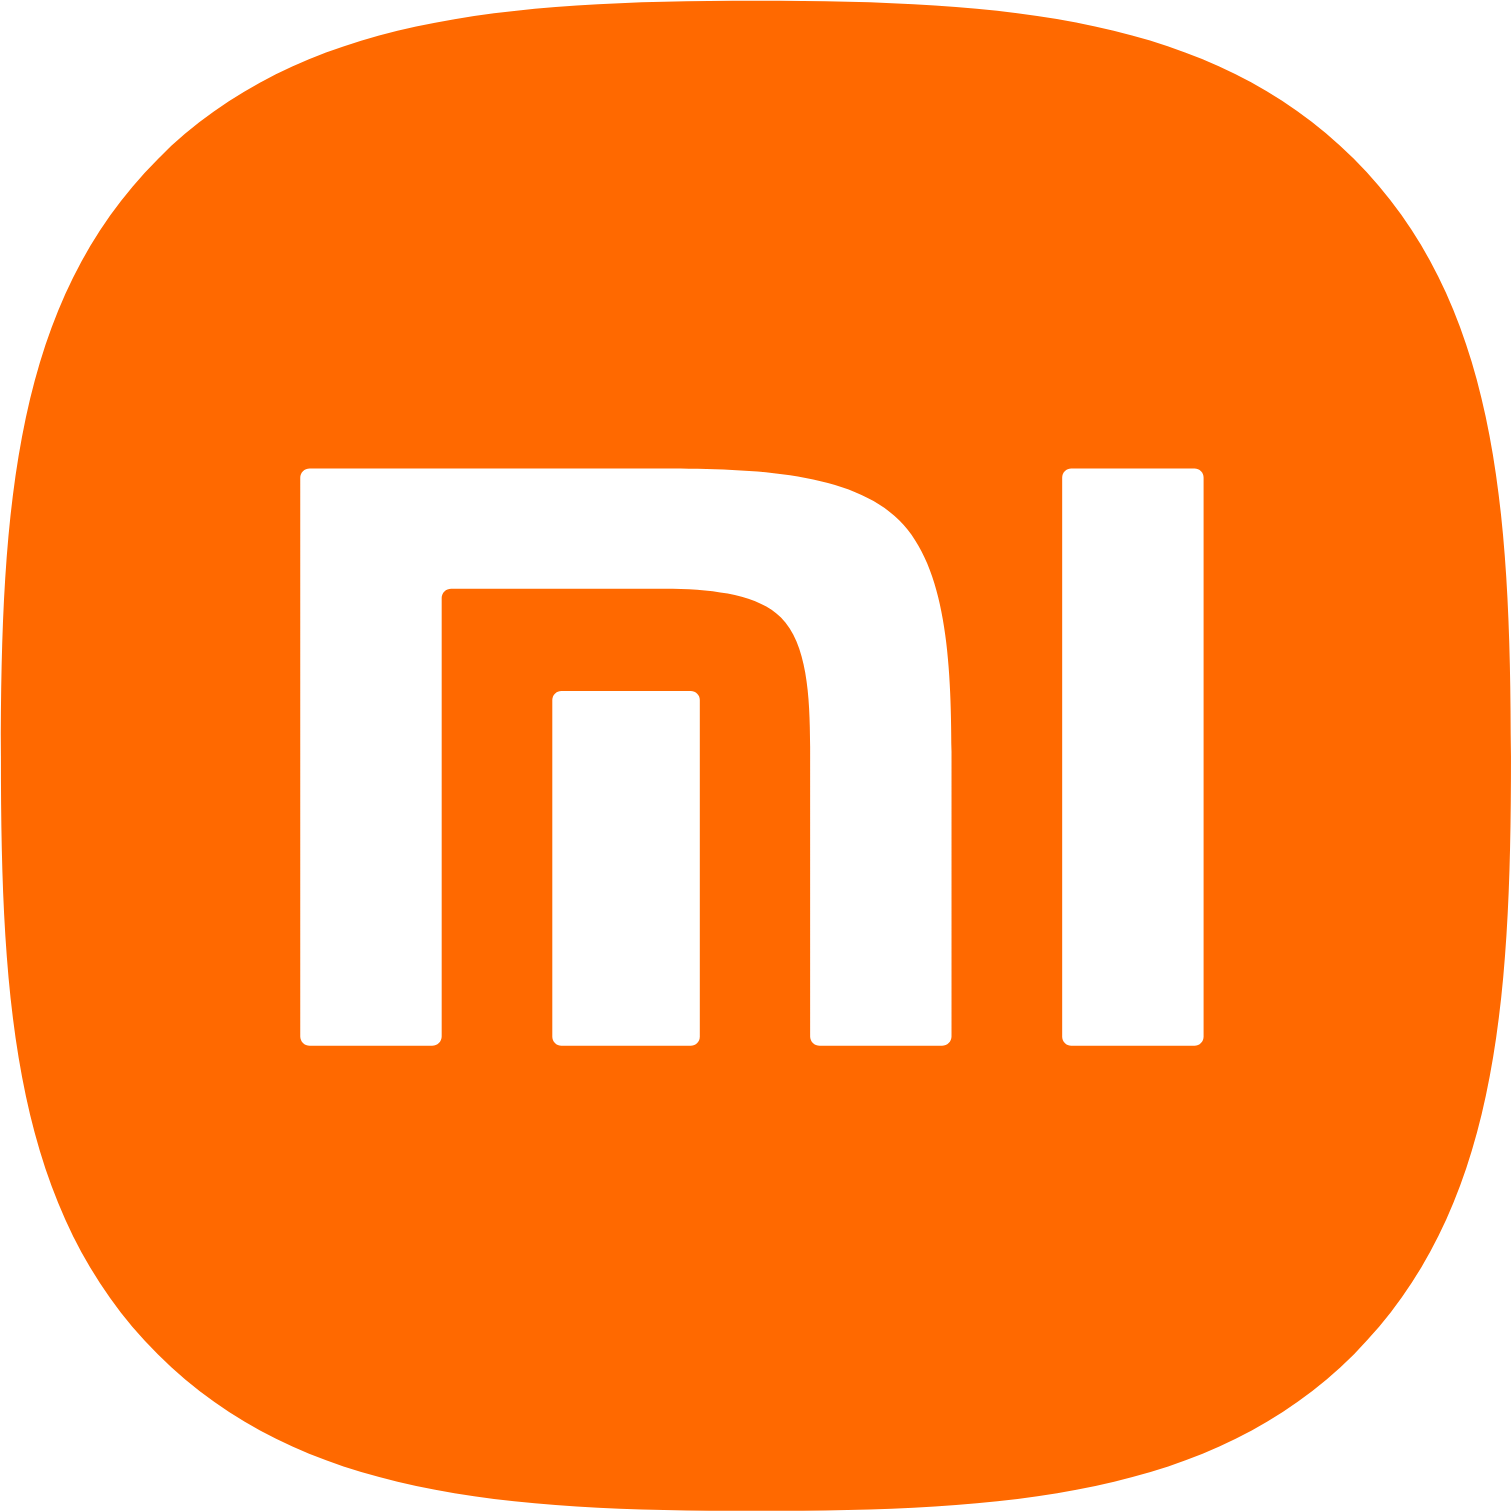 Xiaomi logo in transparent PNG and vectorized SVG formats